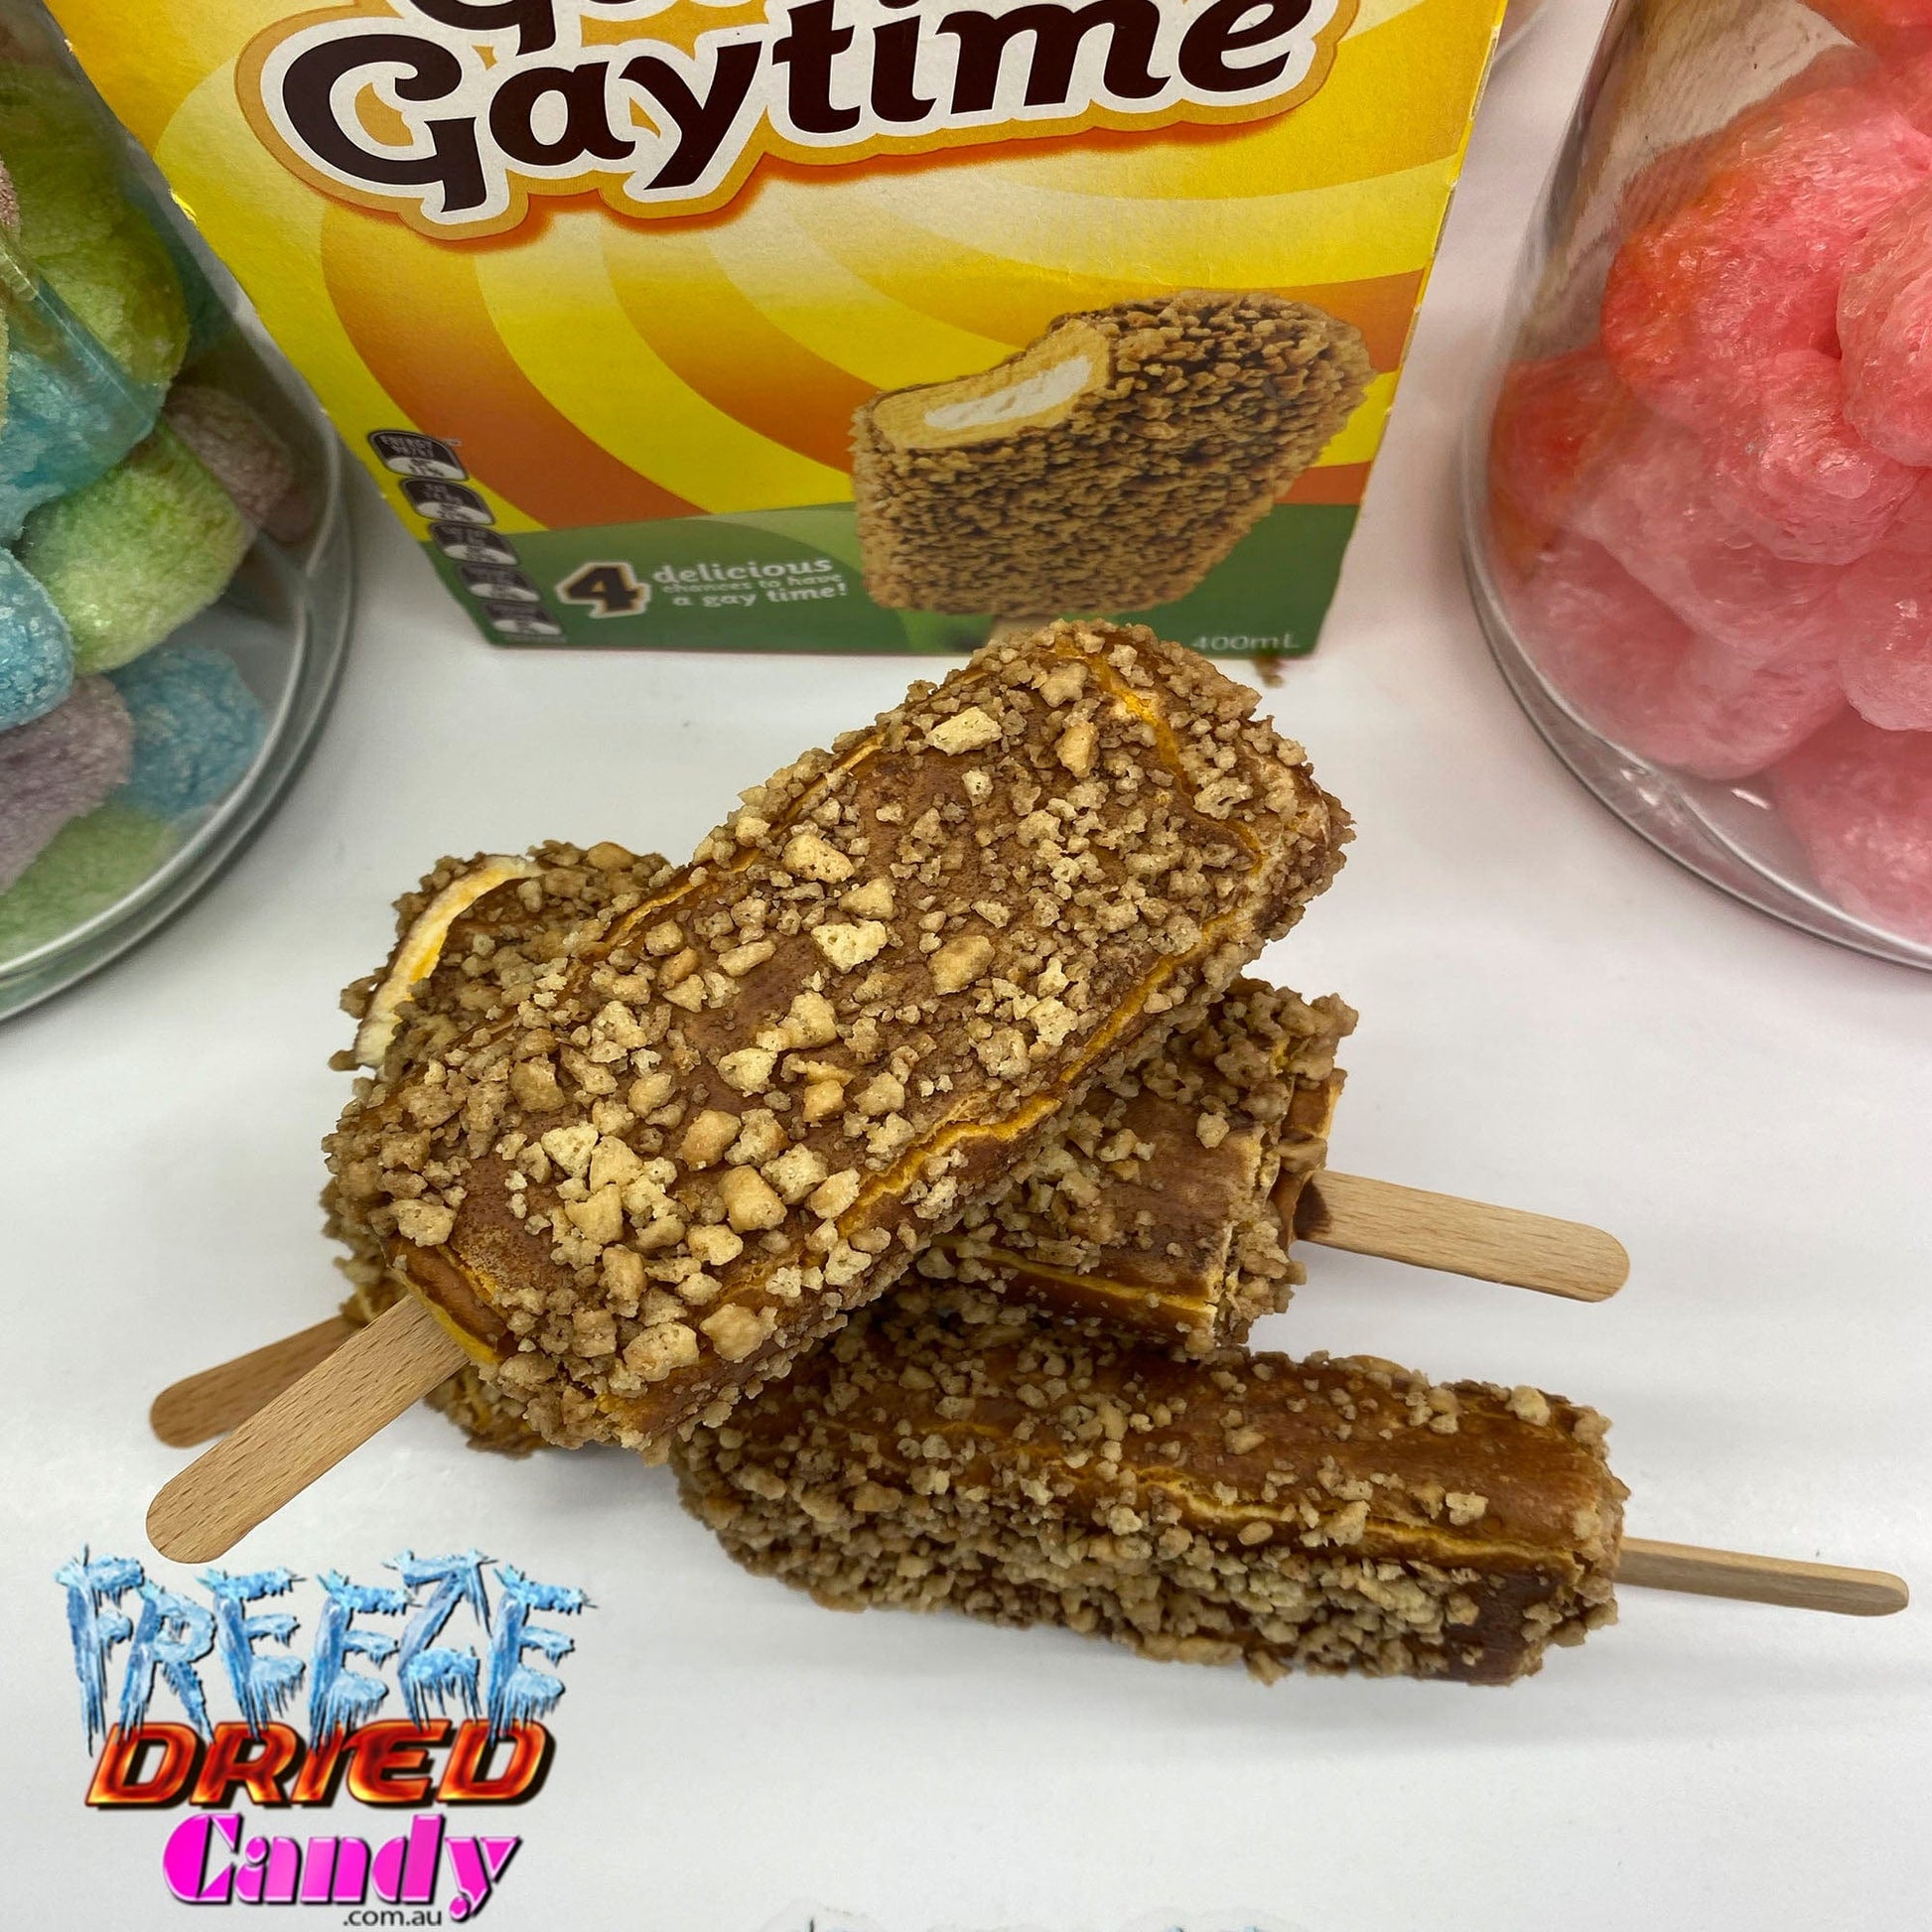 Freeze Dried Golden Gaytime - Orignal -  Freeze Dried Candy Lollies Sweets Treat and Ice Cream 